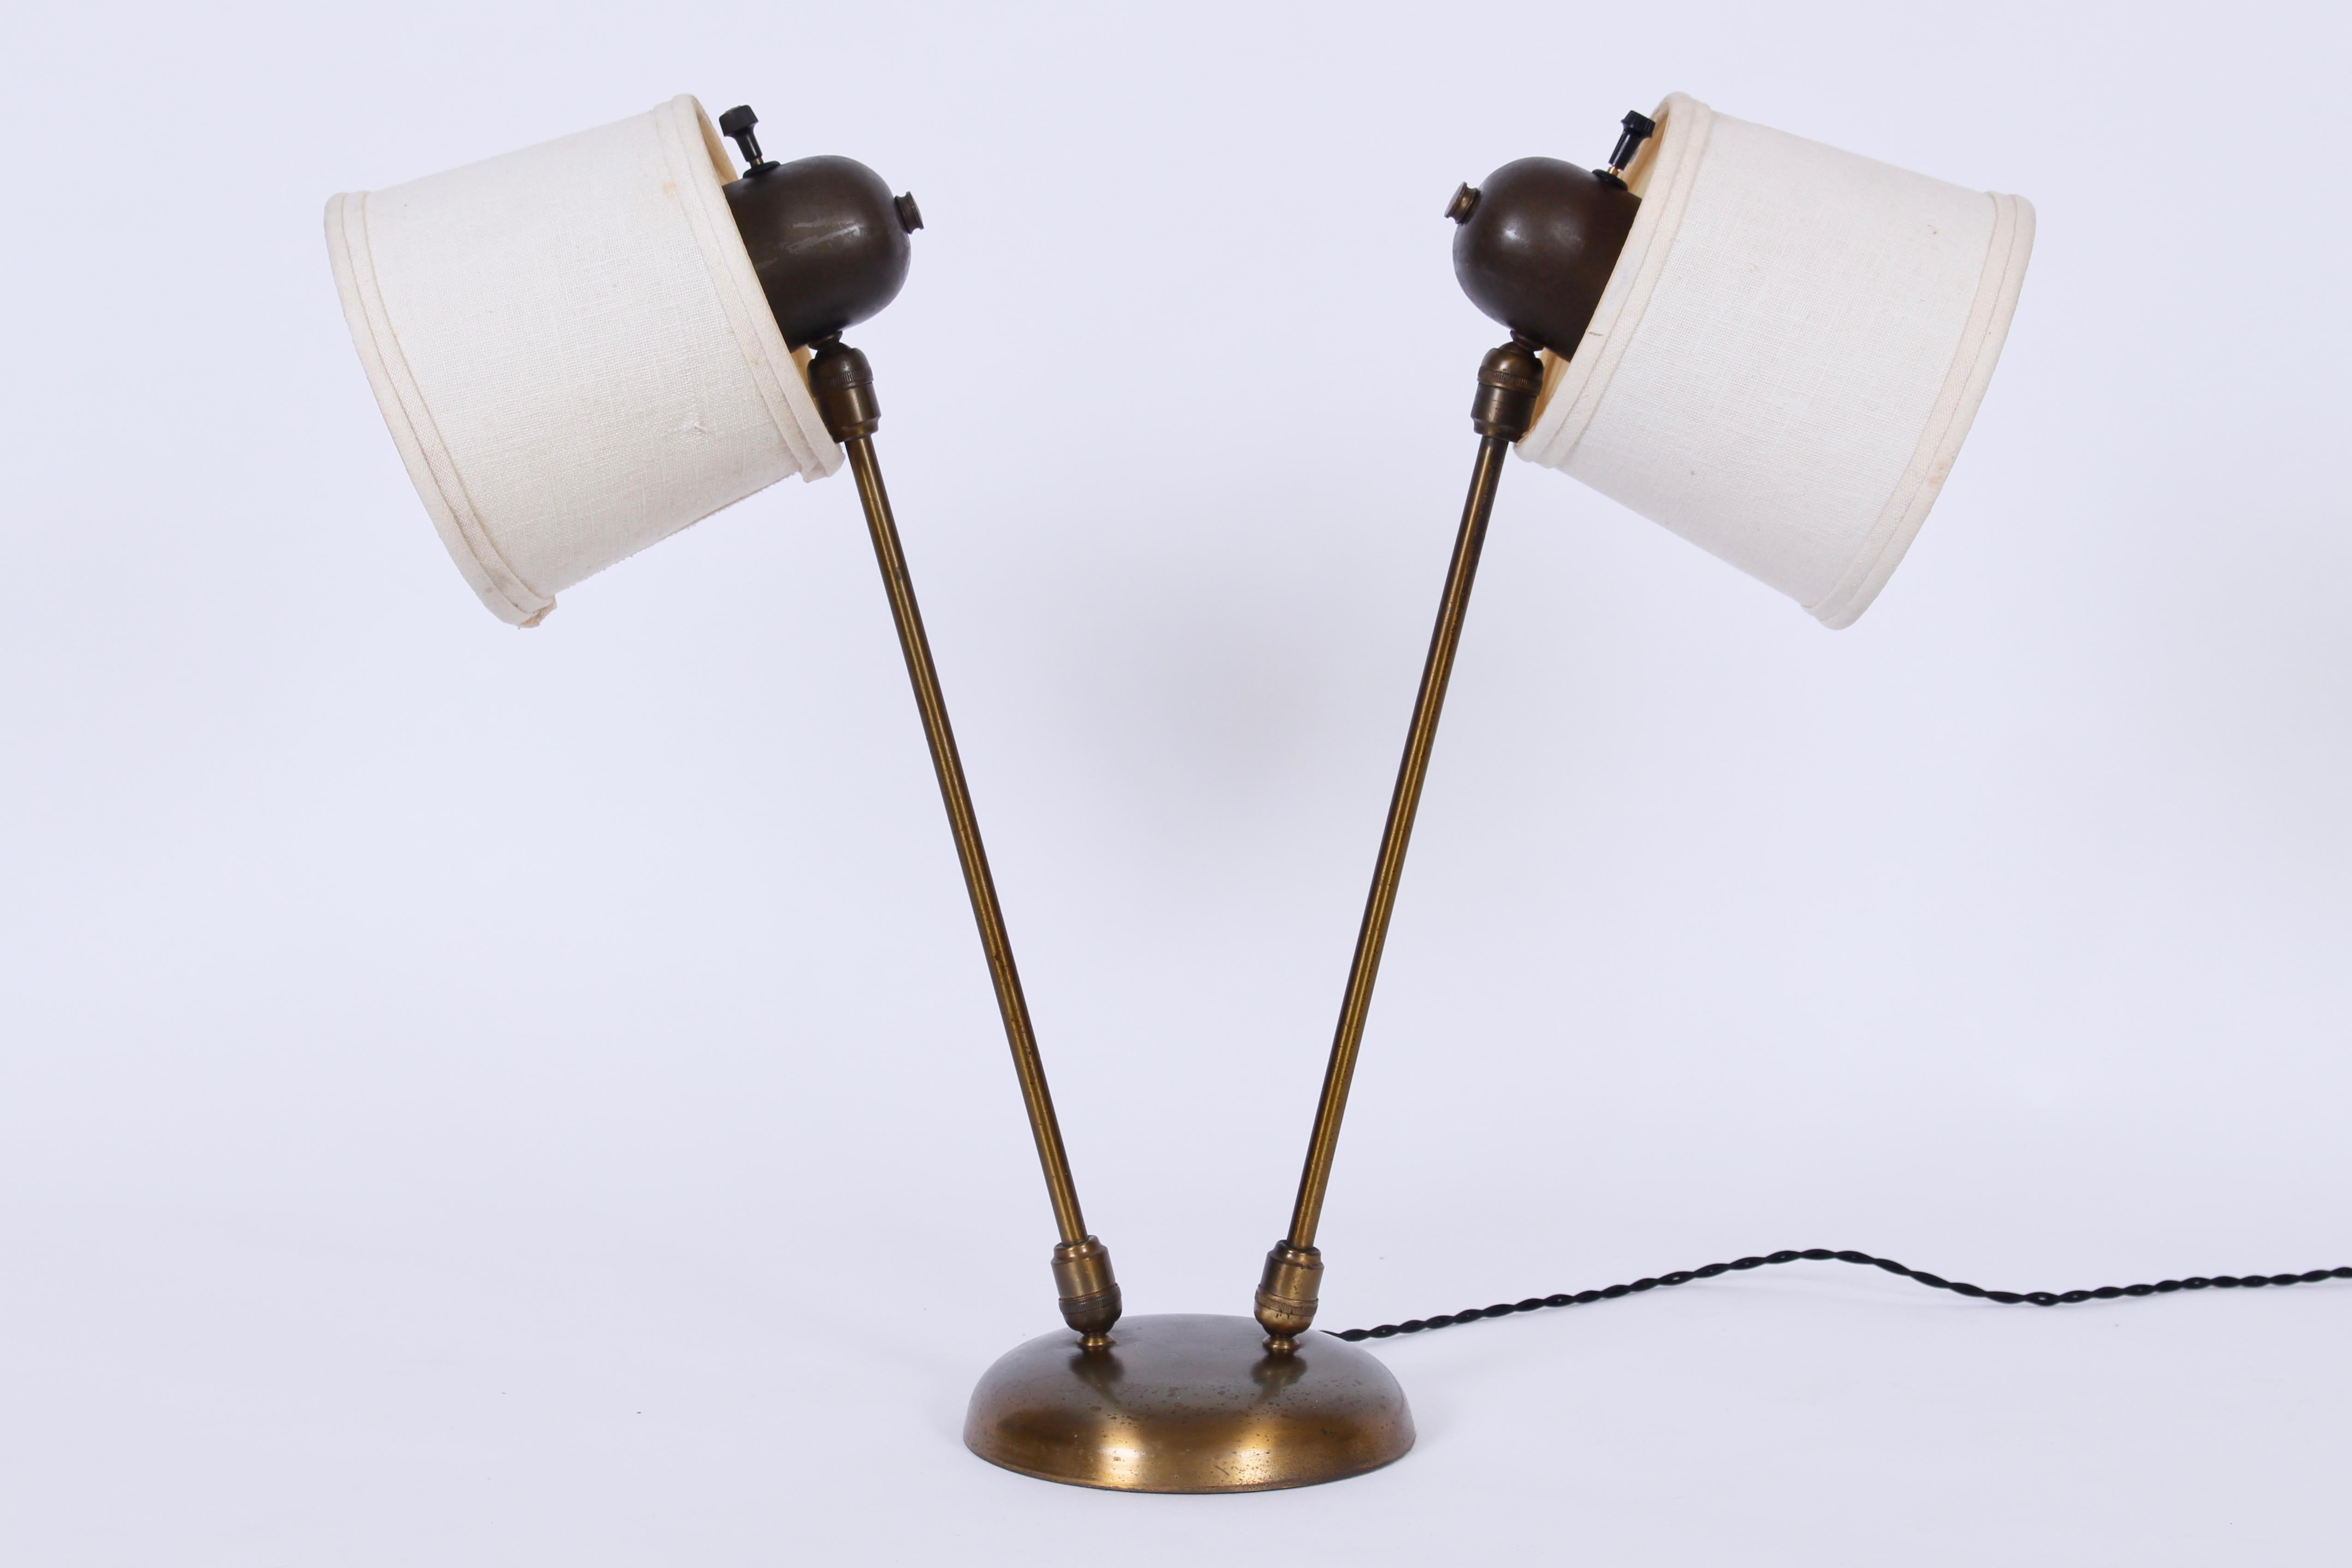 David Wurster articulating two head brass desk lamp.  Featuring finely crafted directional lighting with two adjustable arms, four ball sockets, two natural linen shades, rounded base. Shades (5 H x 5 D top x 6 D bottom).  Early. Modernist. Rarity.